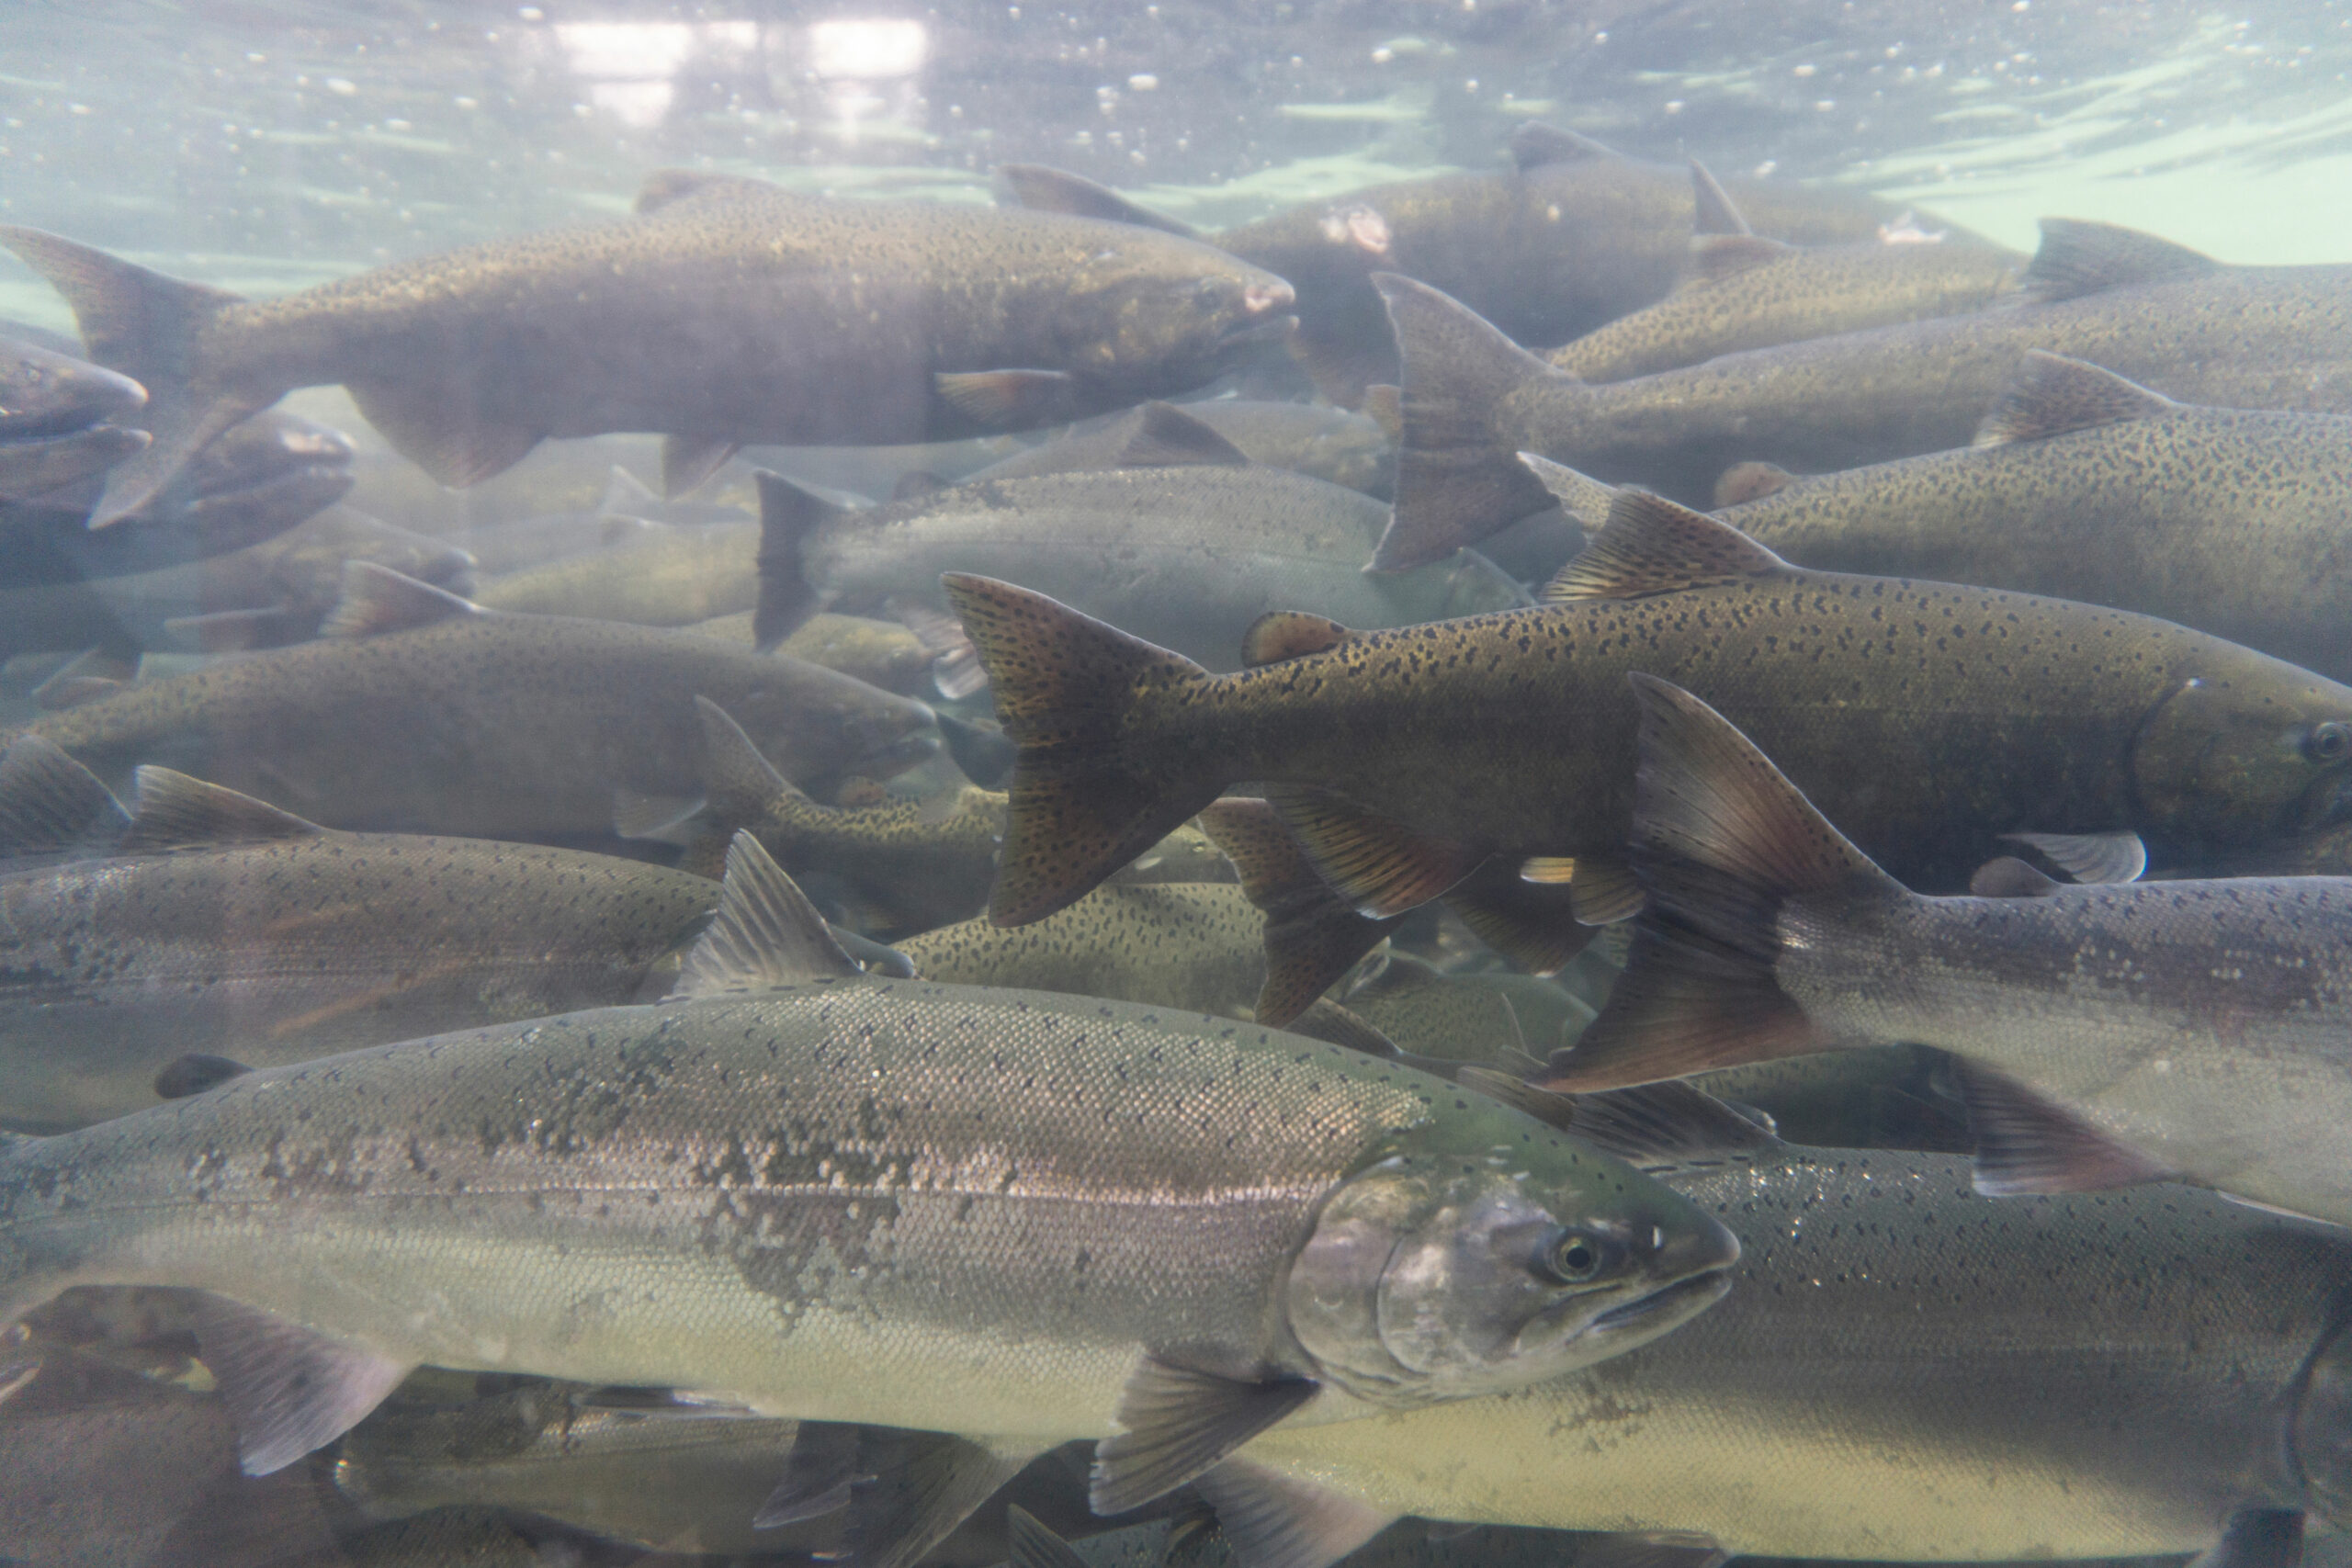 Funding to support salmon recovery